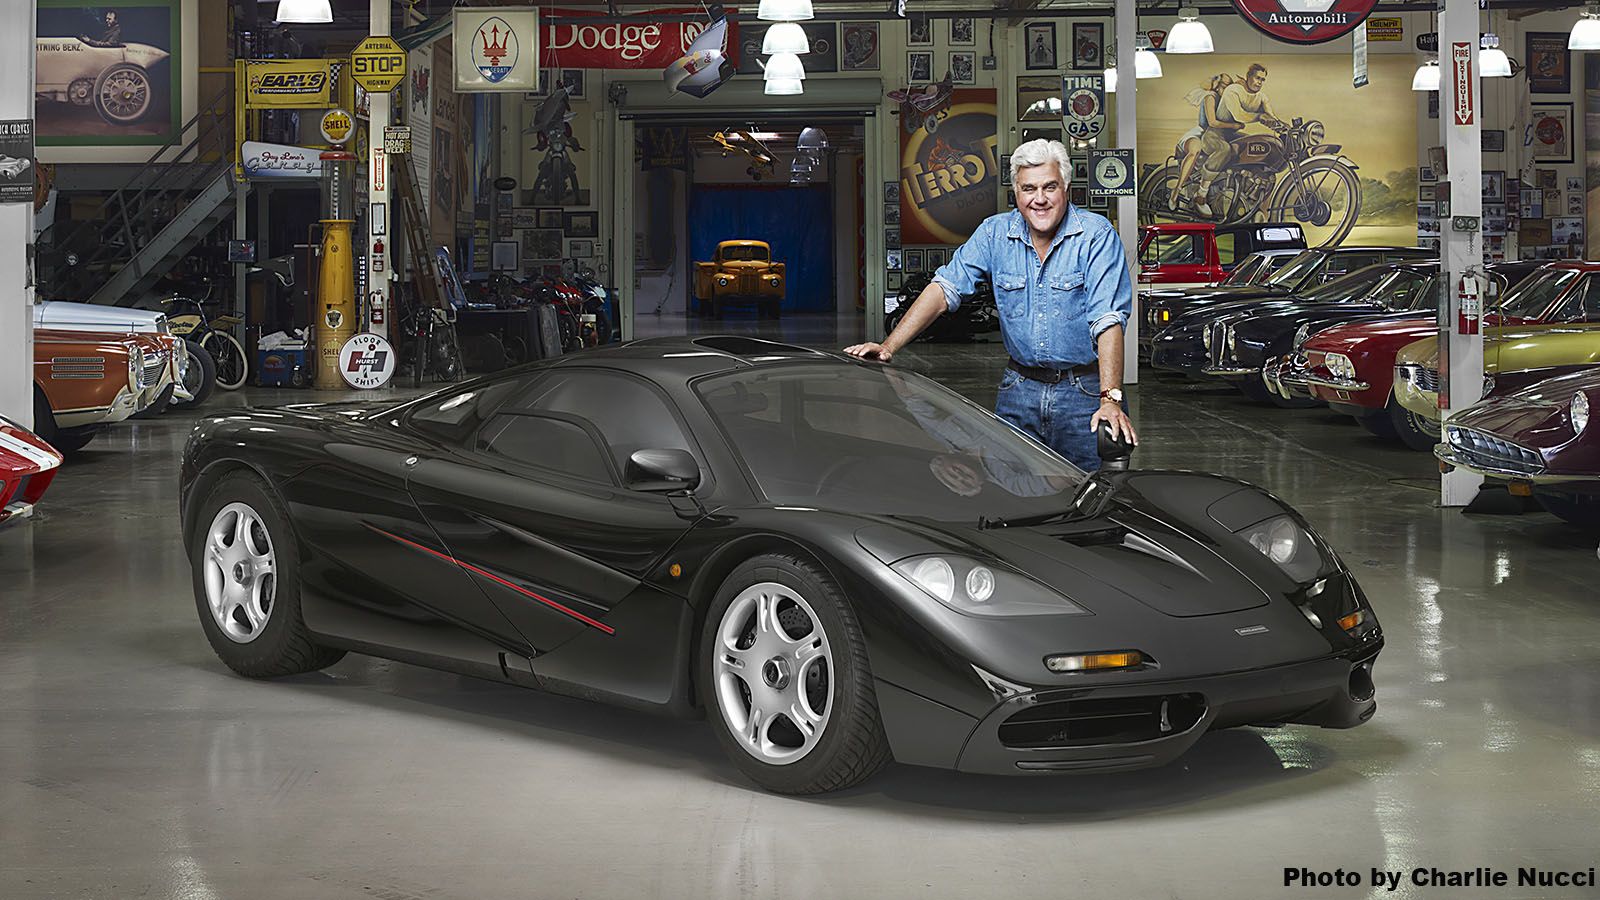 Jay Leno will be at Niswonger Performing Arts Center in Van Wert on Saturday, March 23.